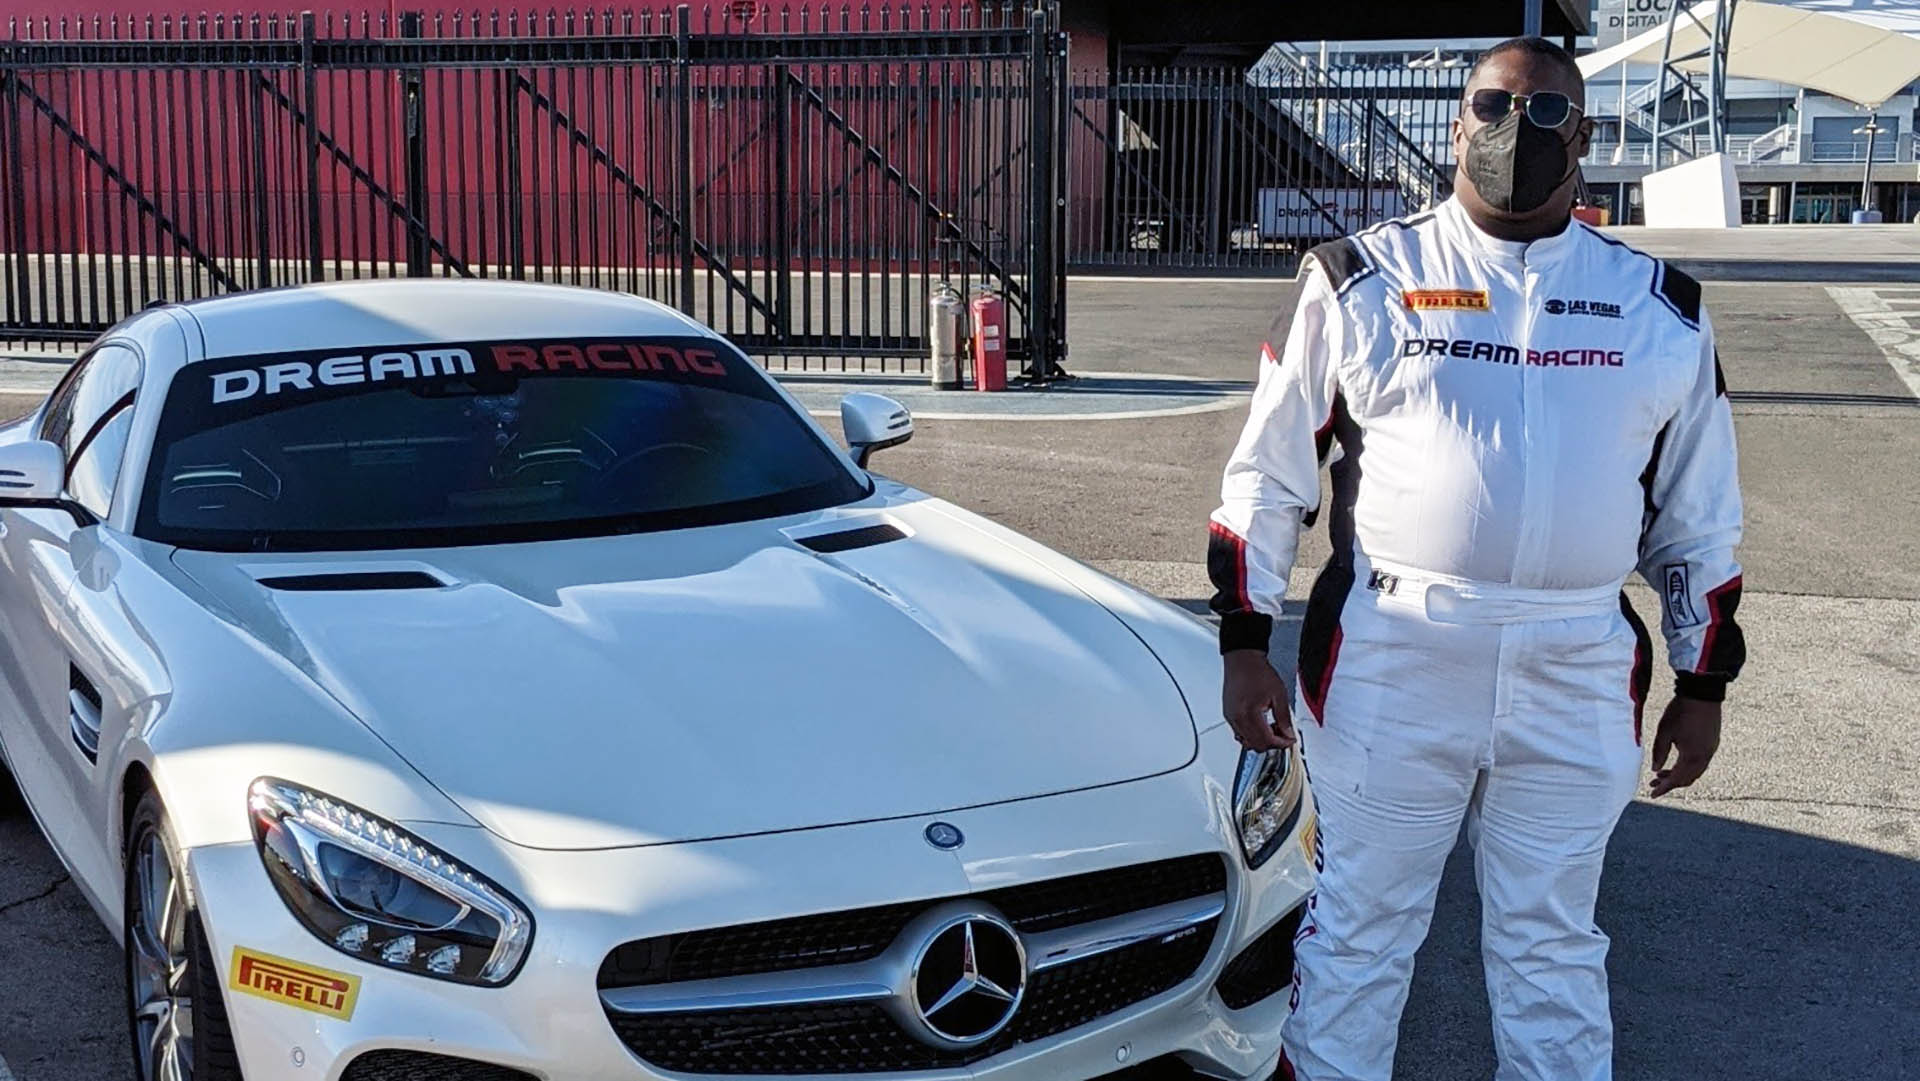 Dakarai wears a mask, sunglasses, and a racing uniform while standing next to a Mercedes that says “Dream Racing” on the windshield.